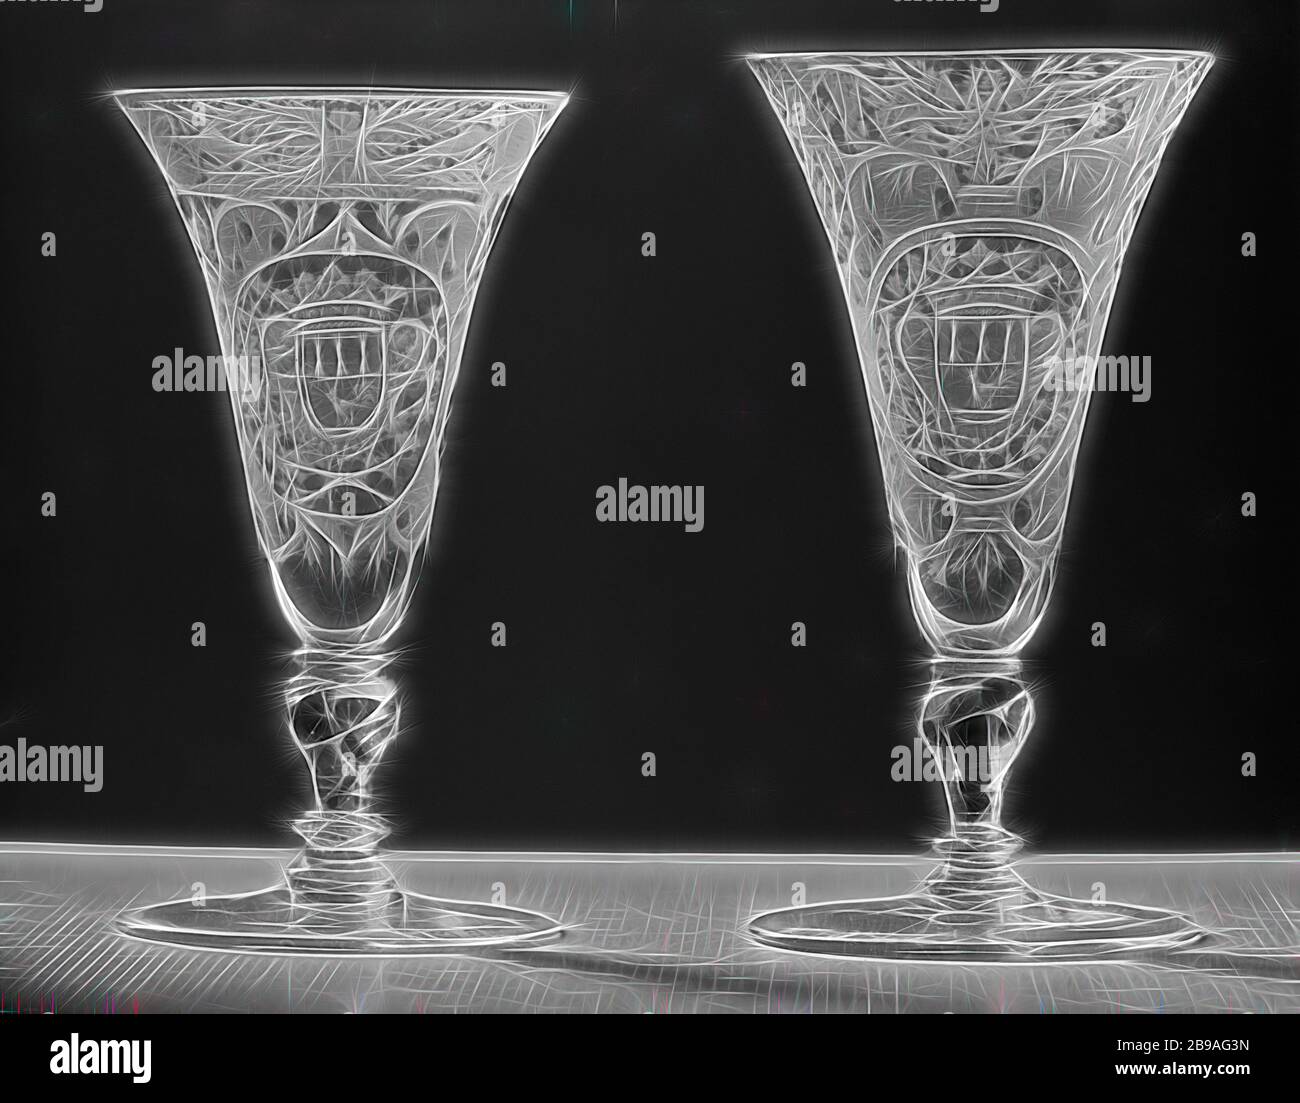 Chalice with the arms of the Van Beuningen family, Chalice made of clear, colorless glass. Flat foot. The twisted, baluster-shaped trunk has a red spiral, a bubble and three mereses. The trumpet-shaped bowl has a rounded bottom. On the chalice, in a cartouche consisting of volutes with matted surfaces with dots and circles, surrounded by leafwork, is an oval medallion with the crowned family crest Van Beuningen, flanked by two branches that are tied together at the bottom. Along the mouth edge a band with symmetrical leafwork and flower sprays and two pigeons between a serrated edge and a styl Stock Photo